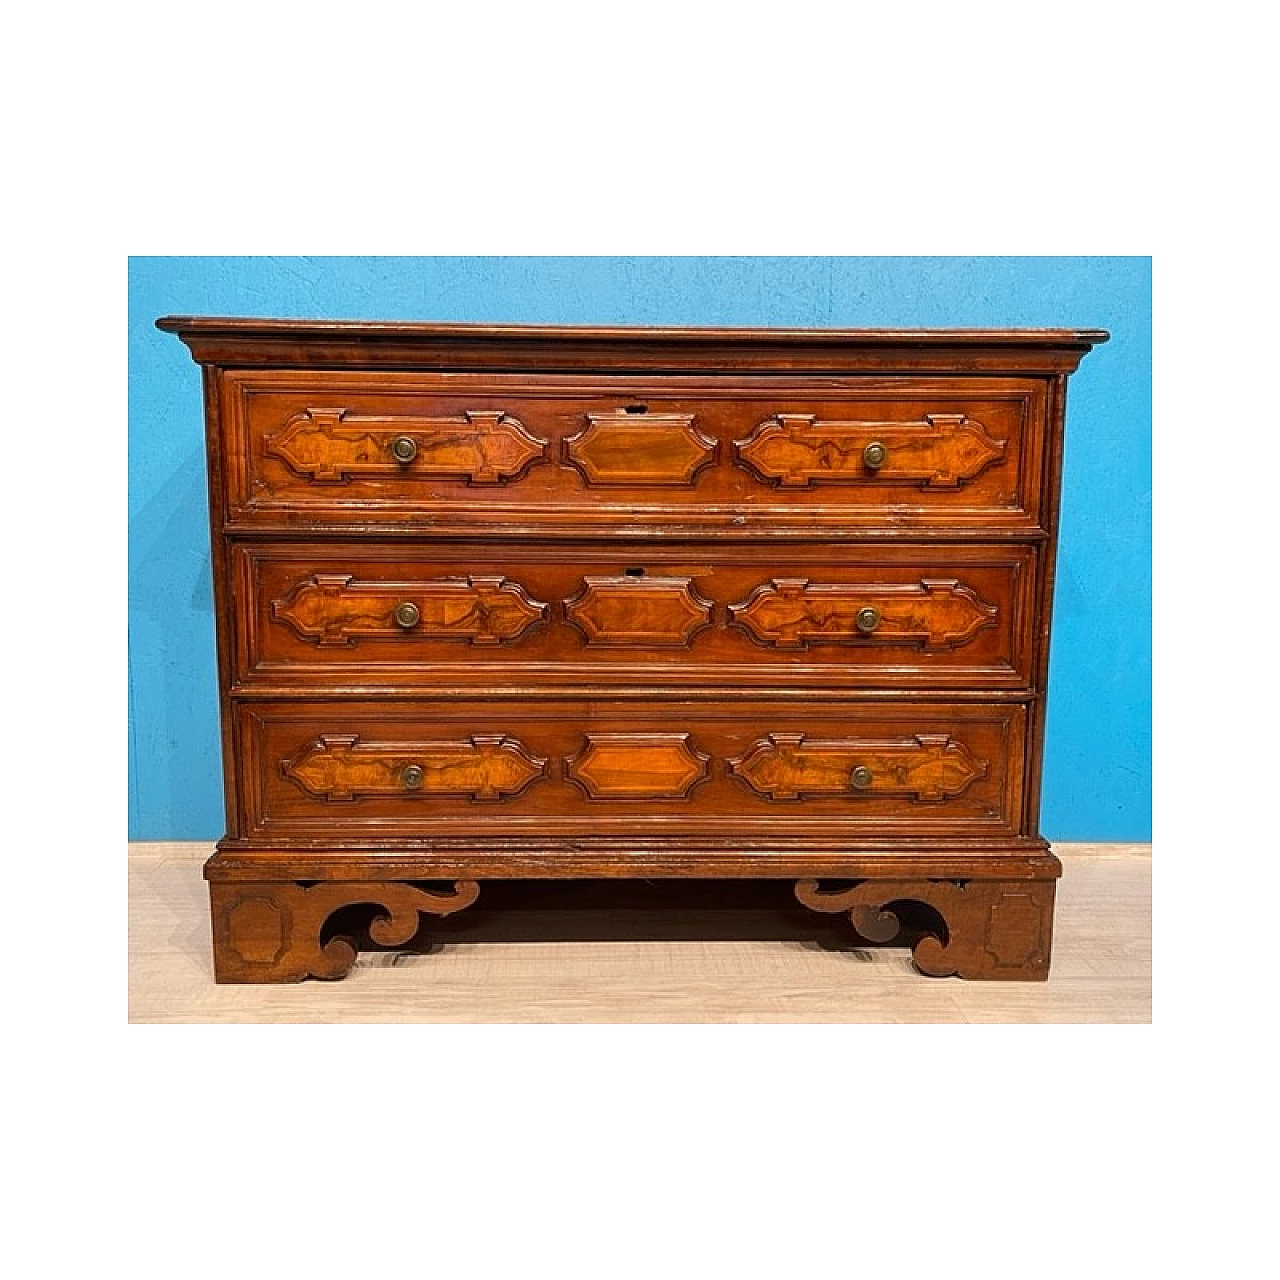 Lombardy chest of drawers in cherry wood, late 18th century 1